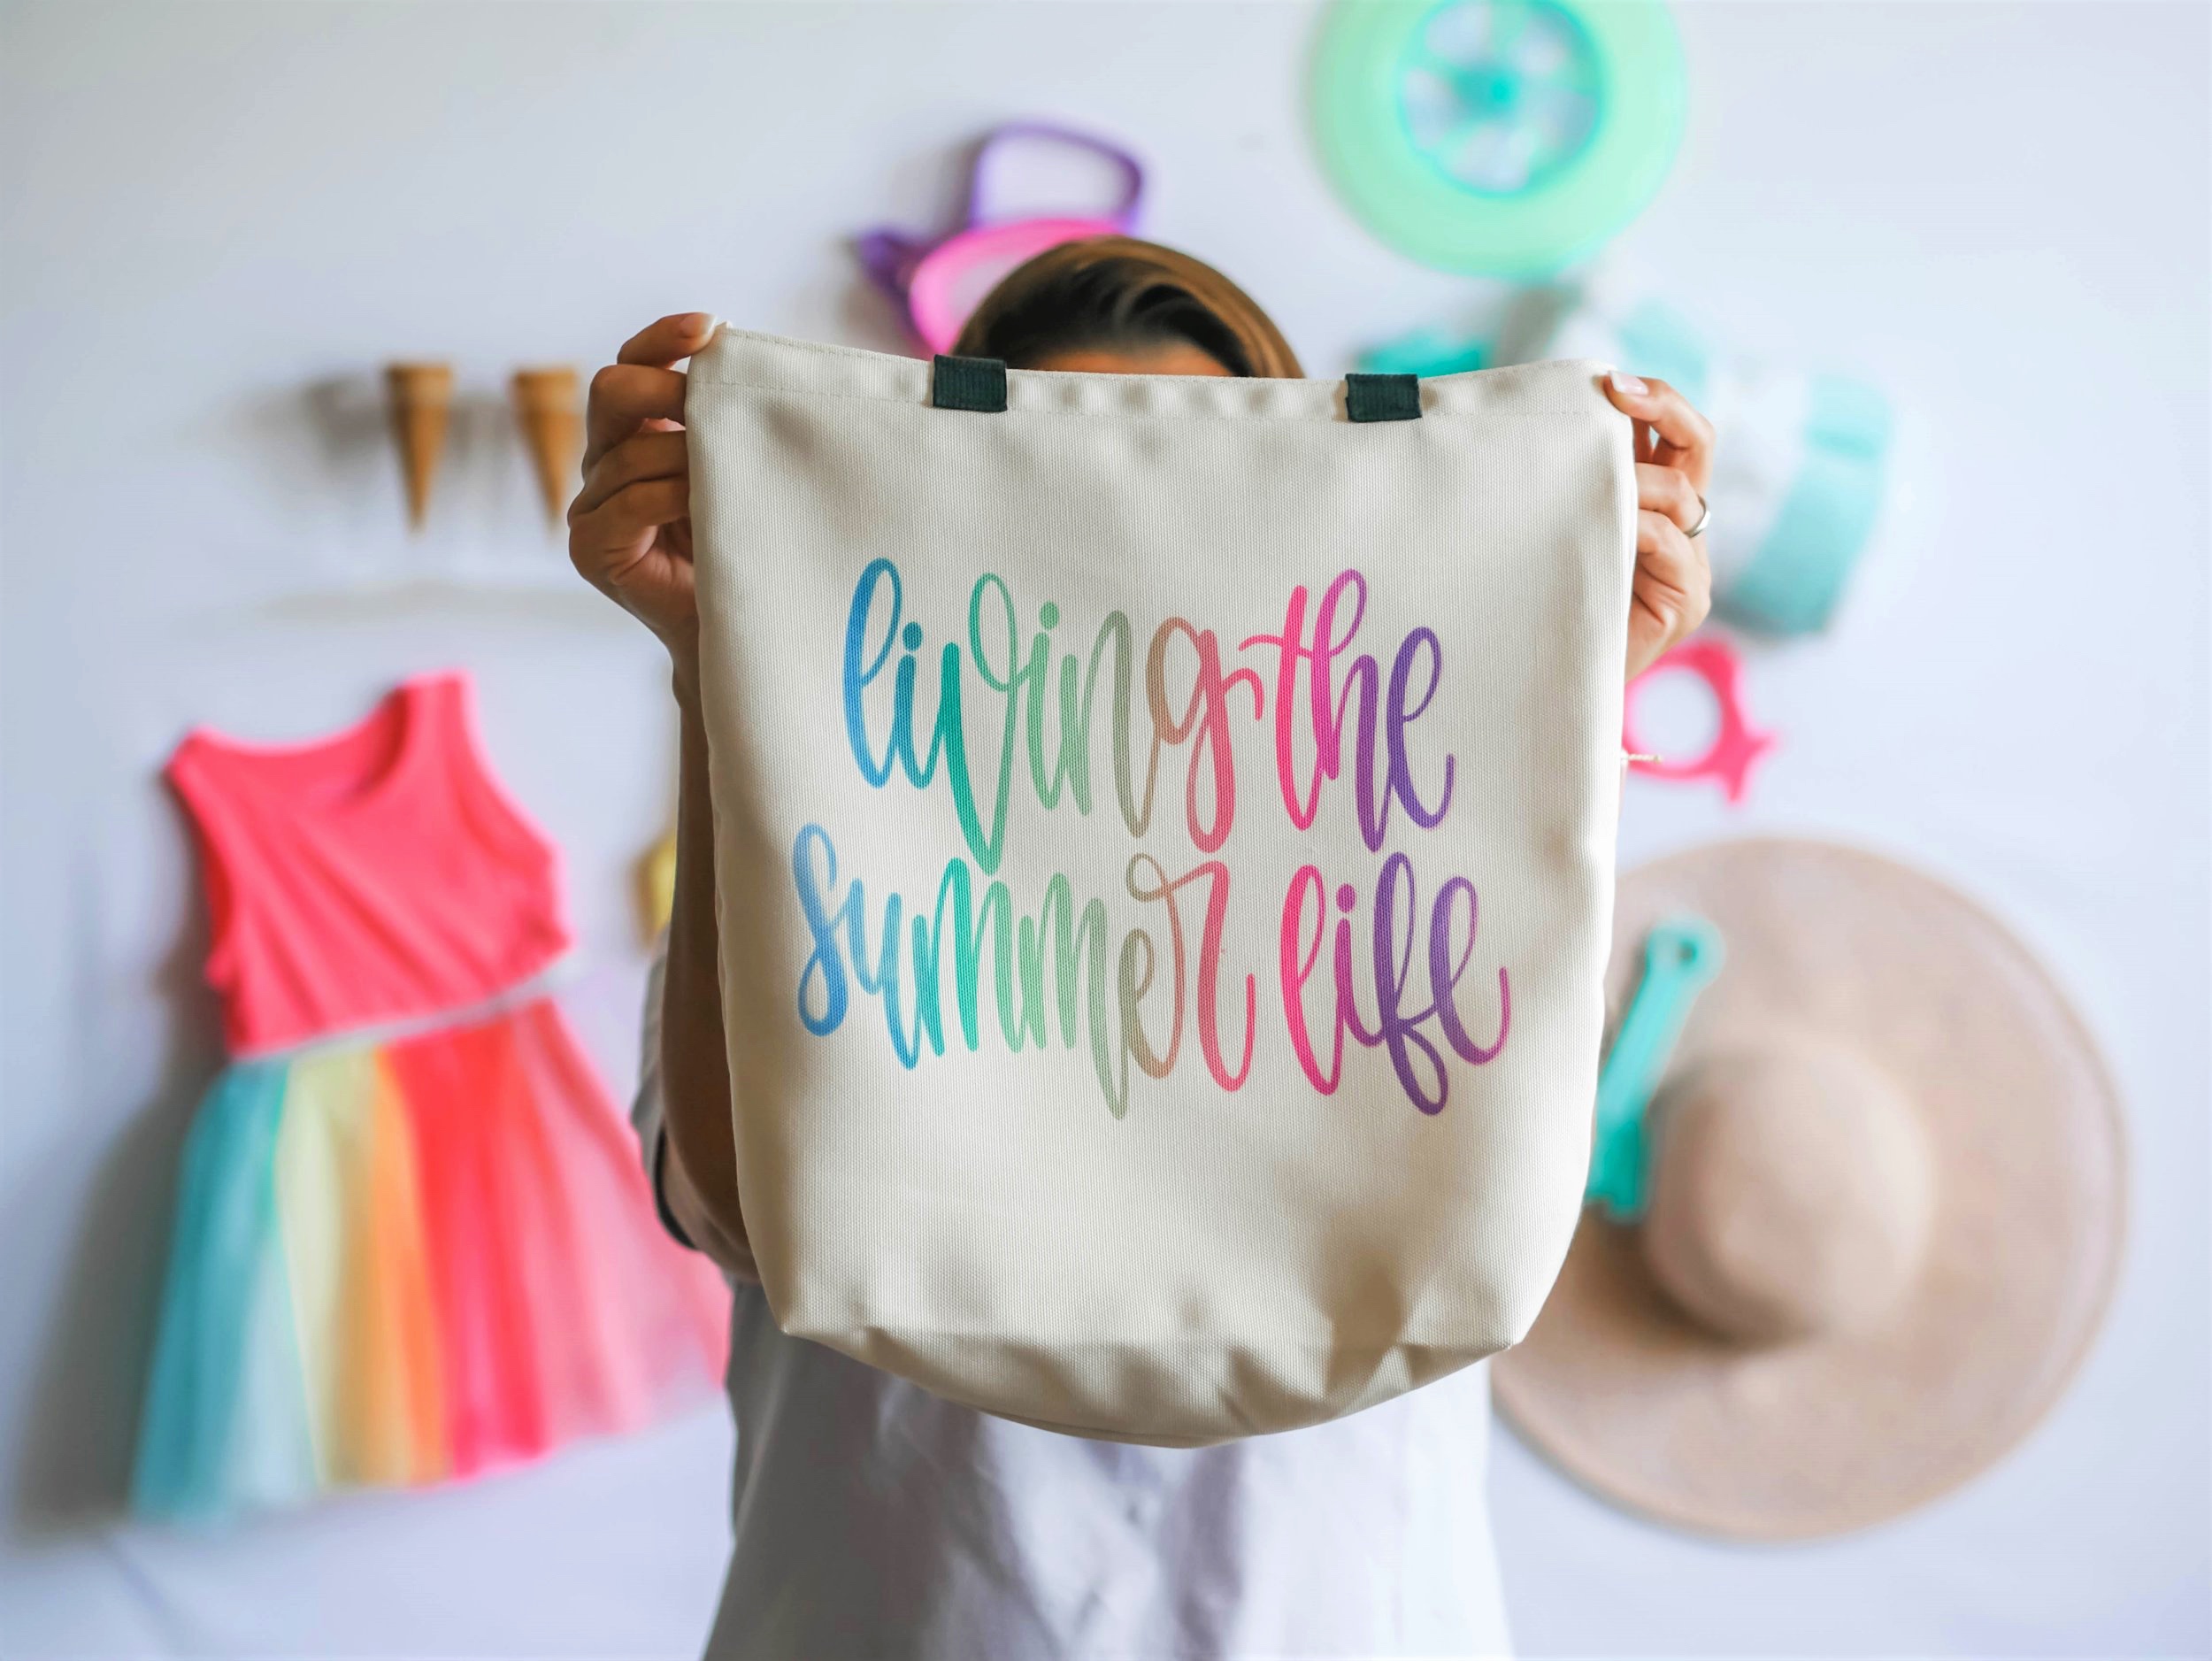 How to use Cricut Infusible Ink Transfers on Tote Bag DIY